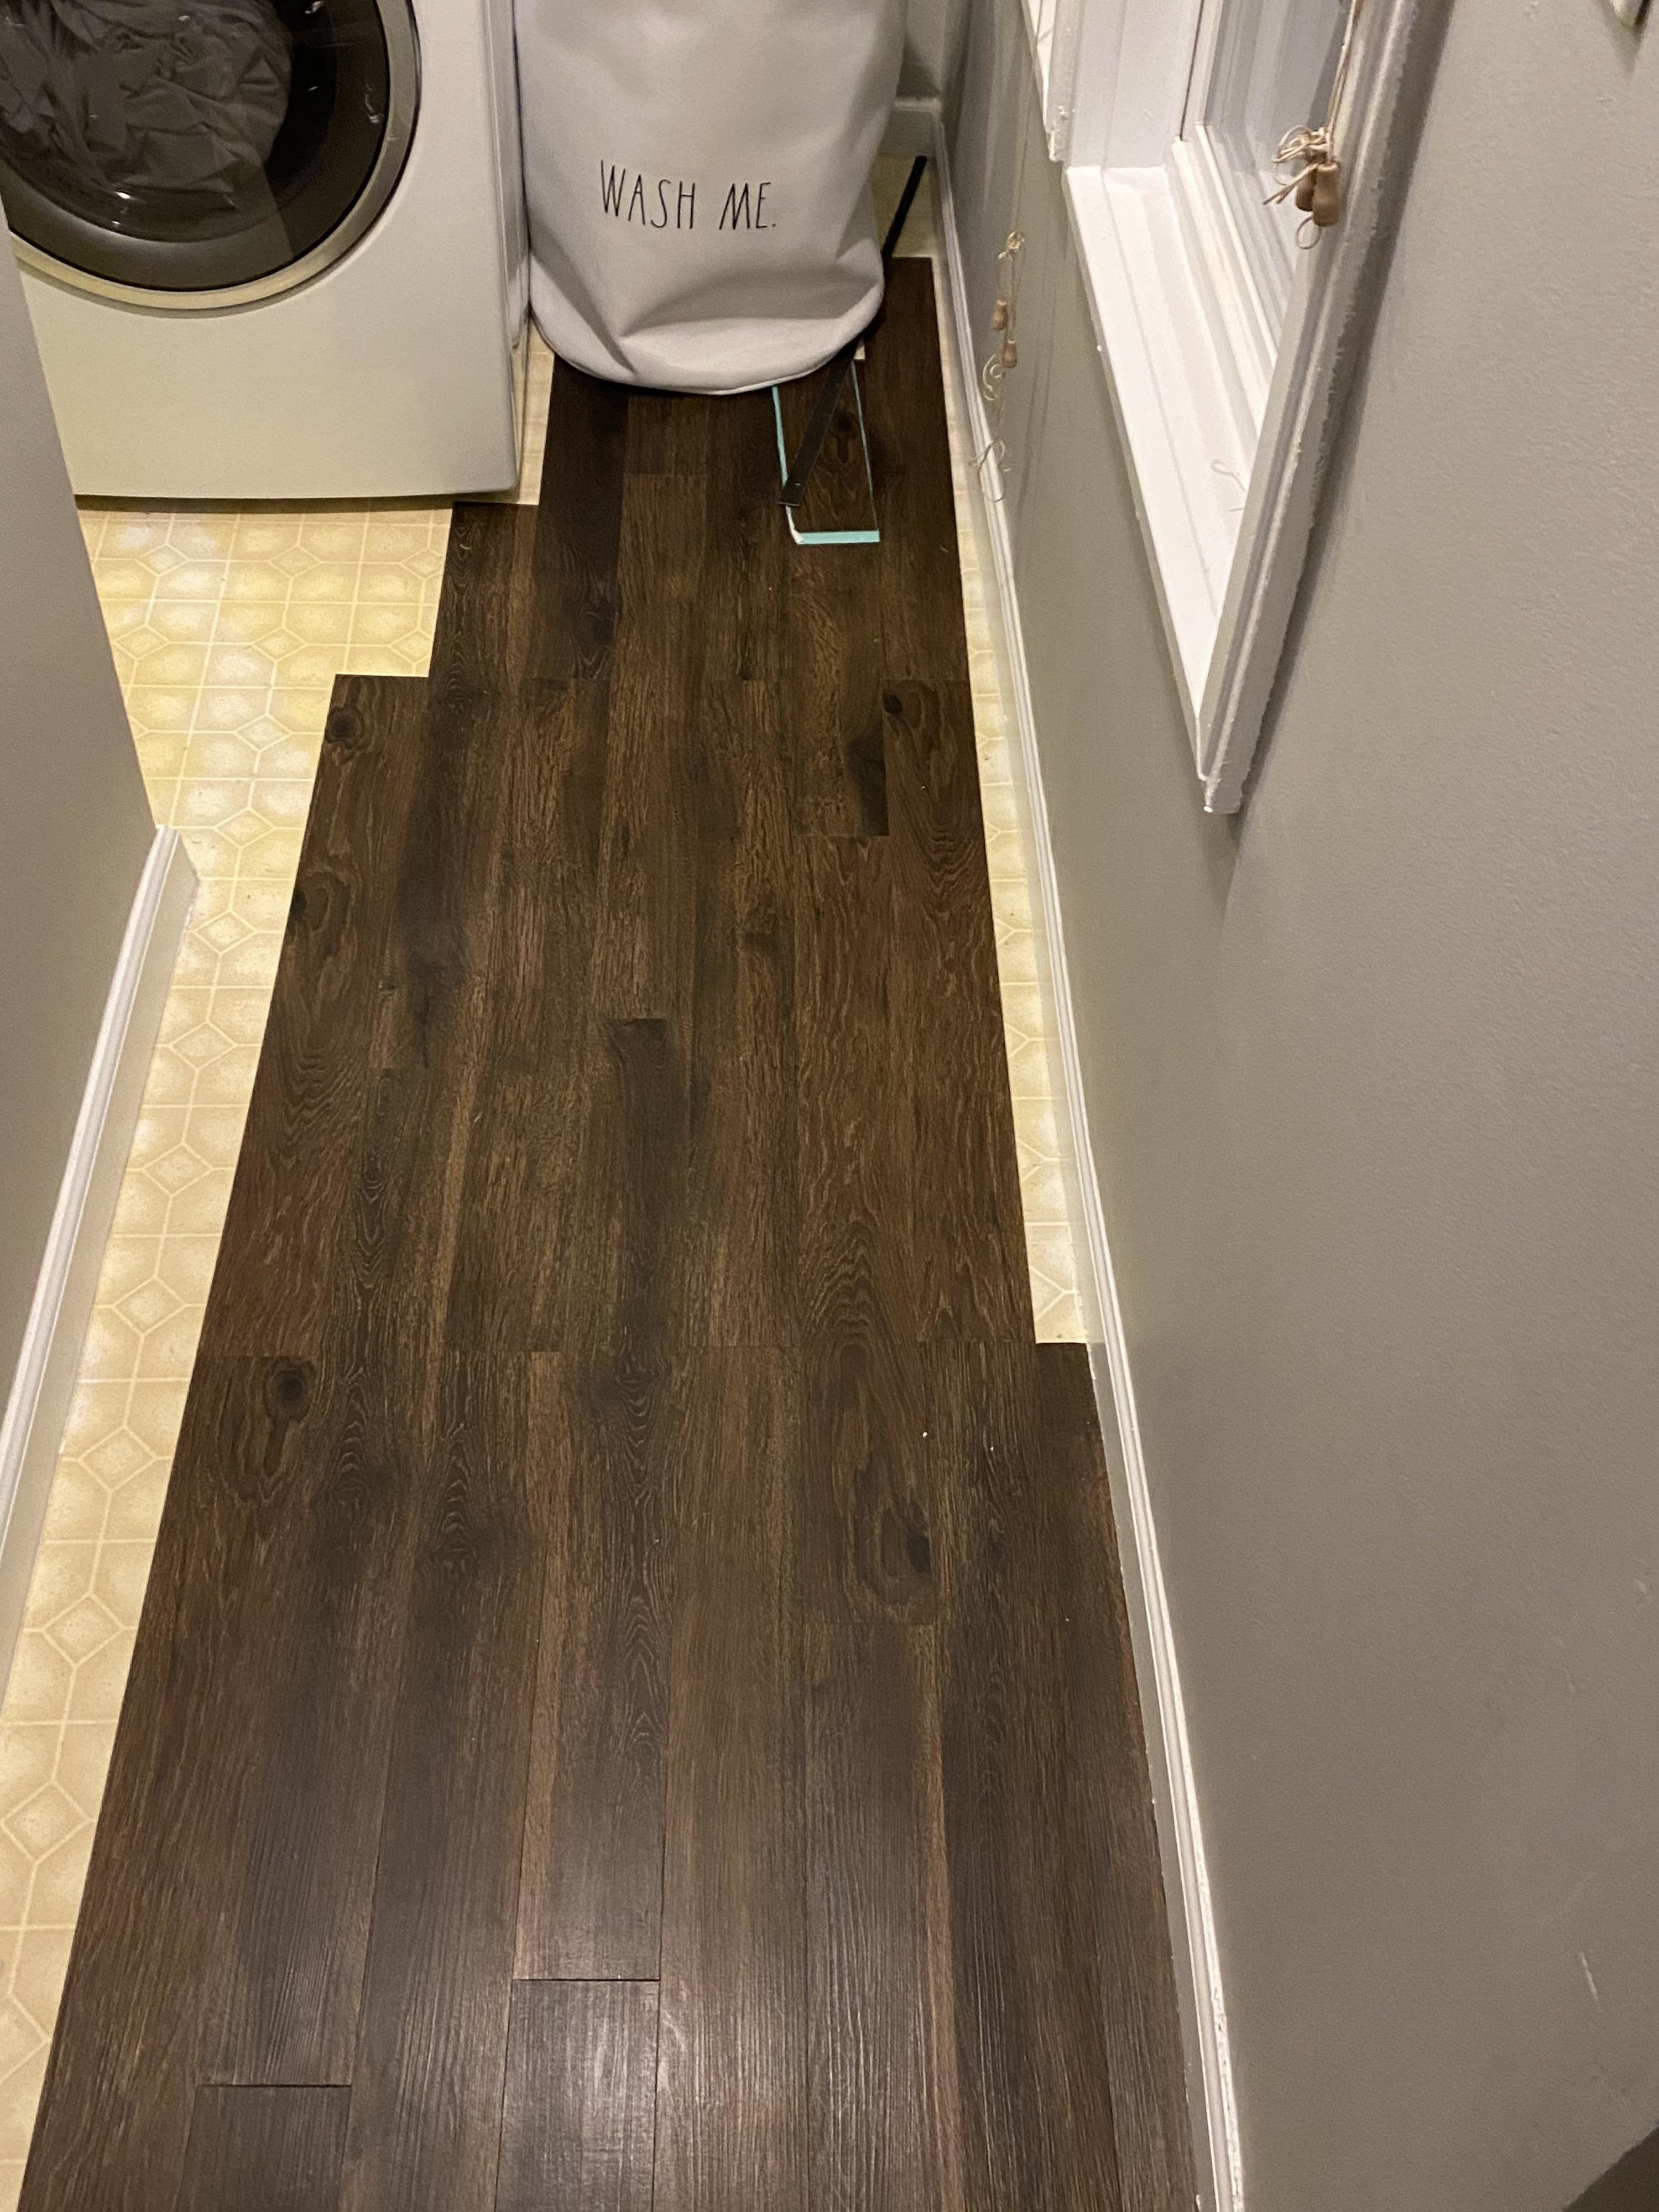 sections of wood vinyl plank laid down in a bathroom on top of tile